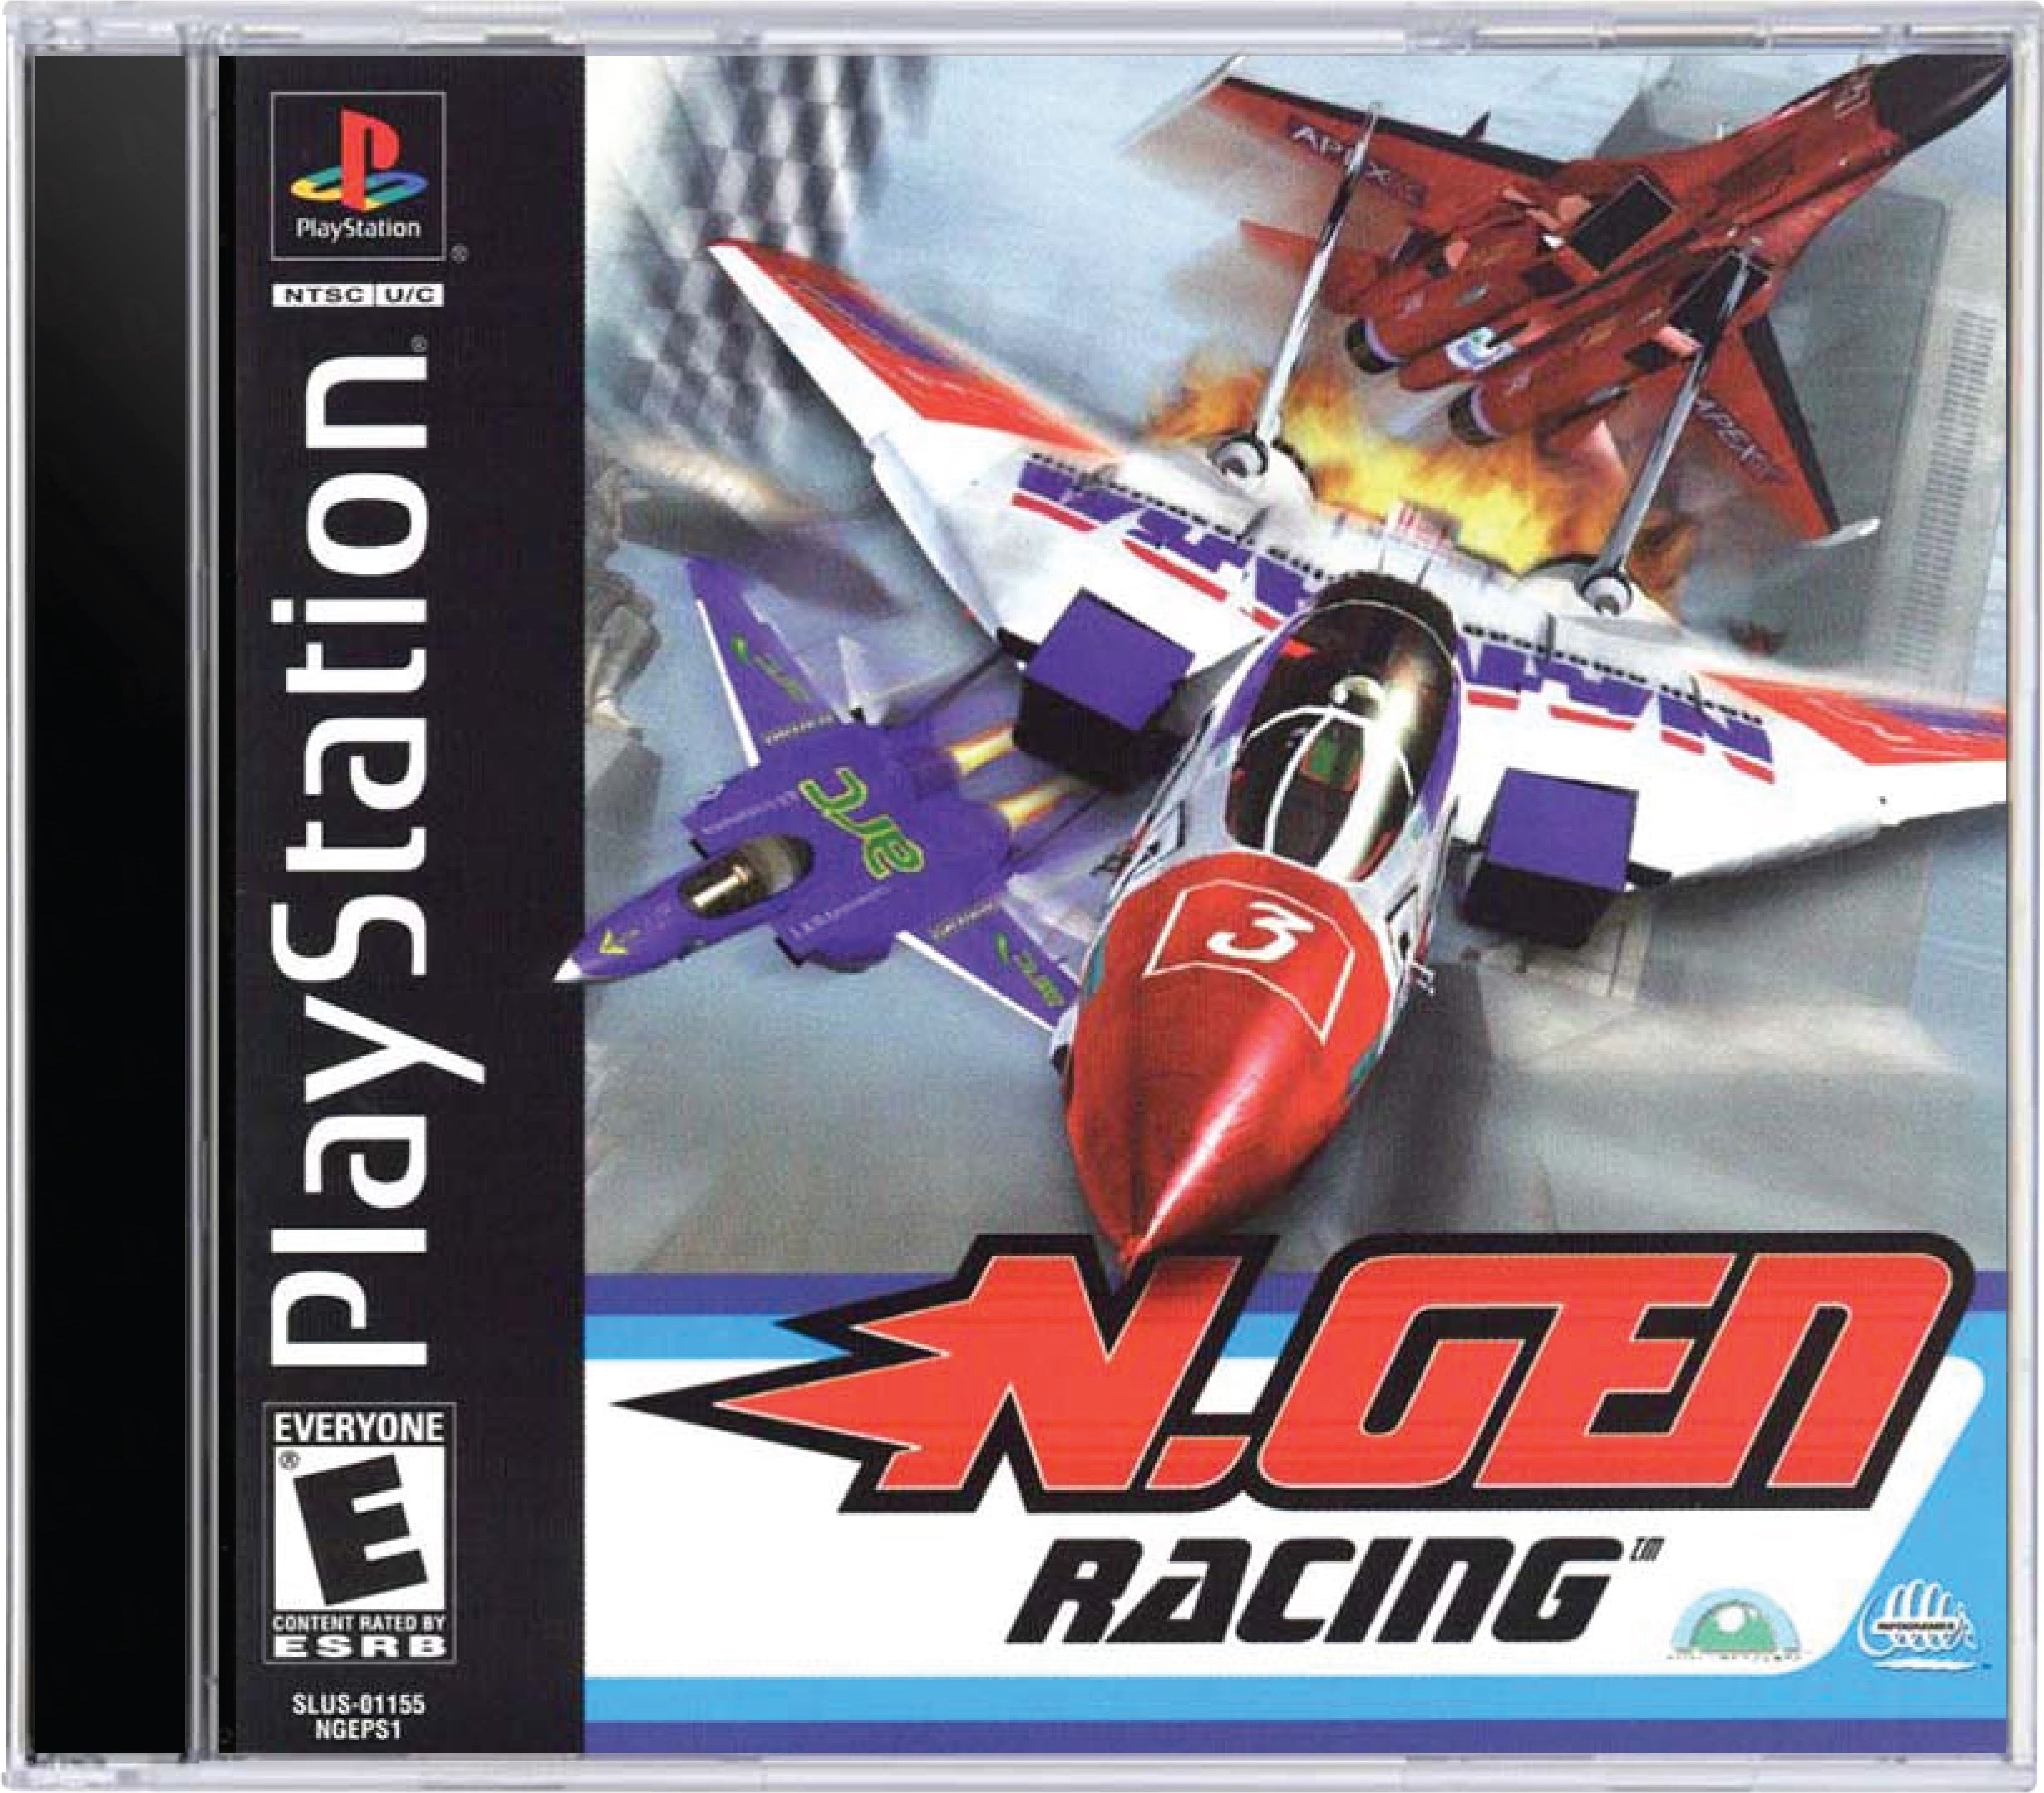 NGEN Racing Cover Art and Product Photo